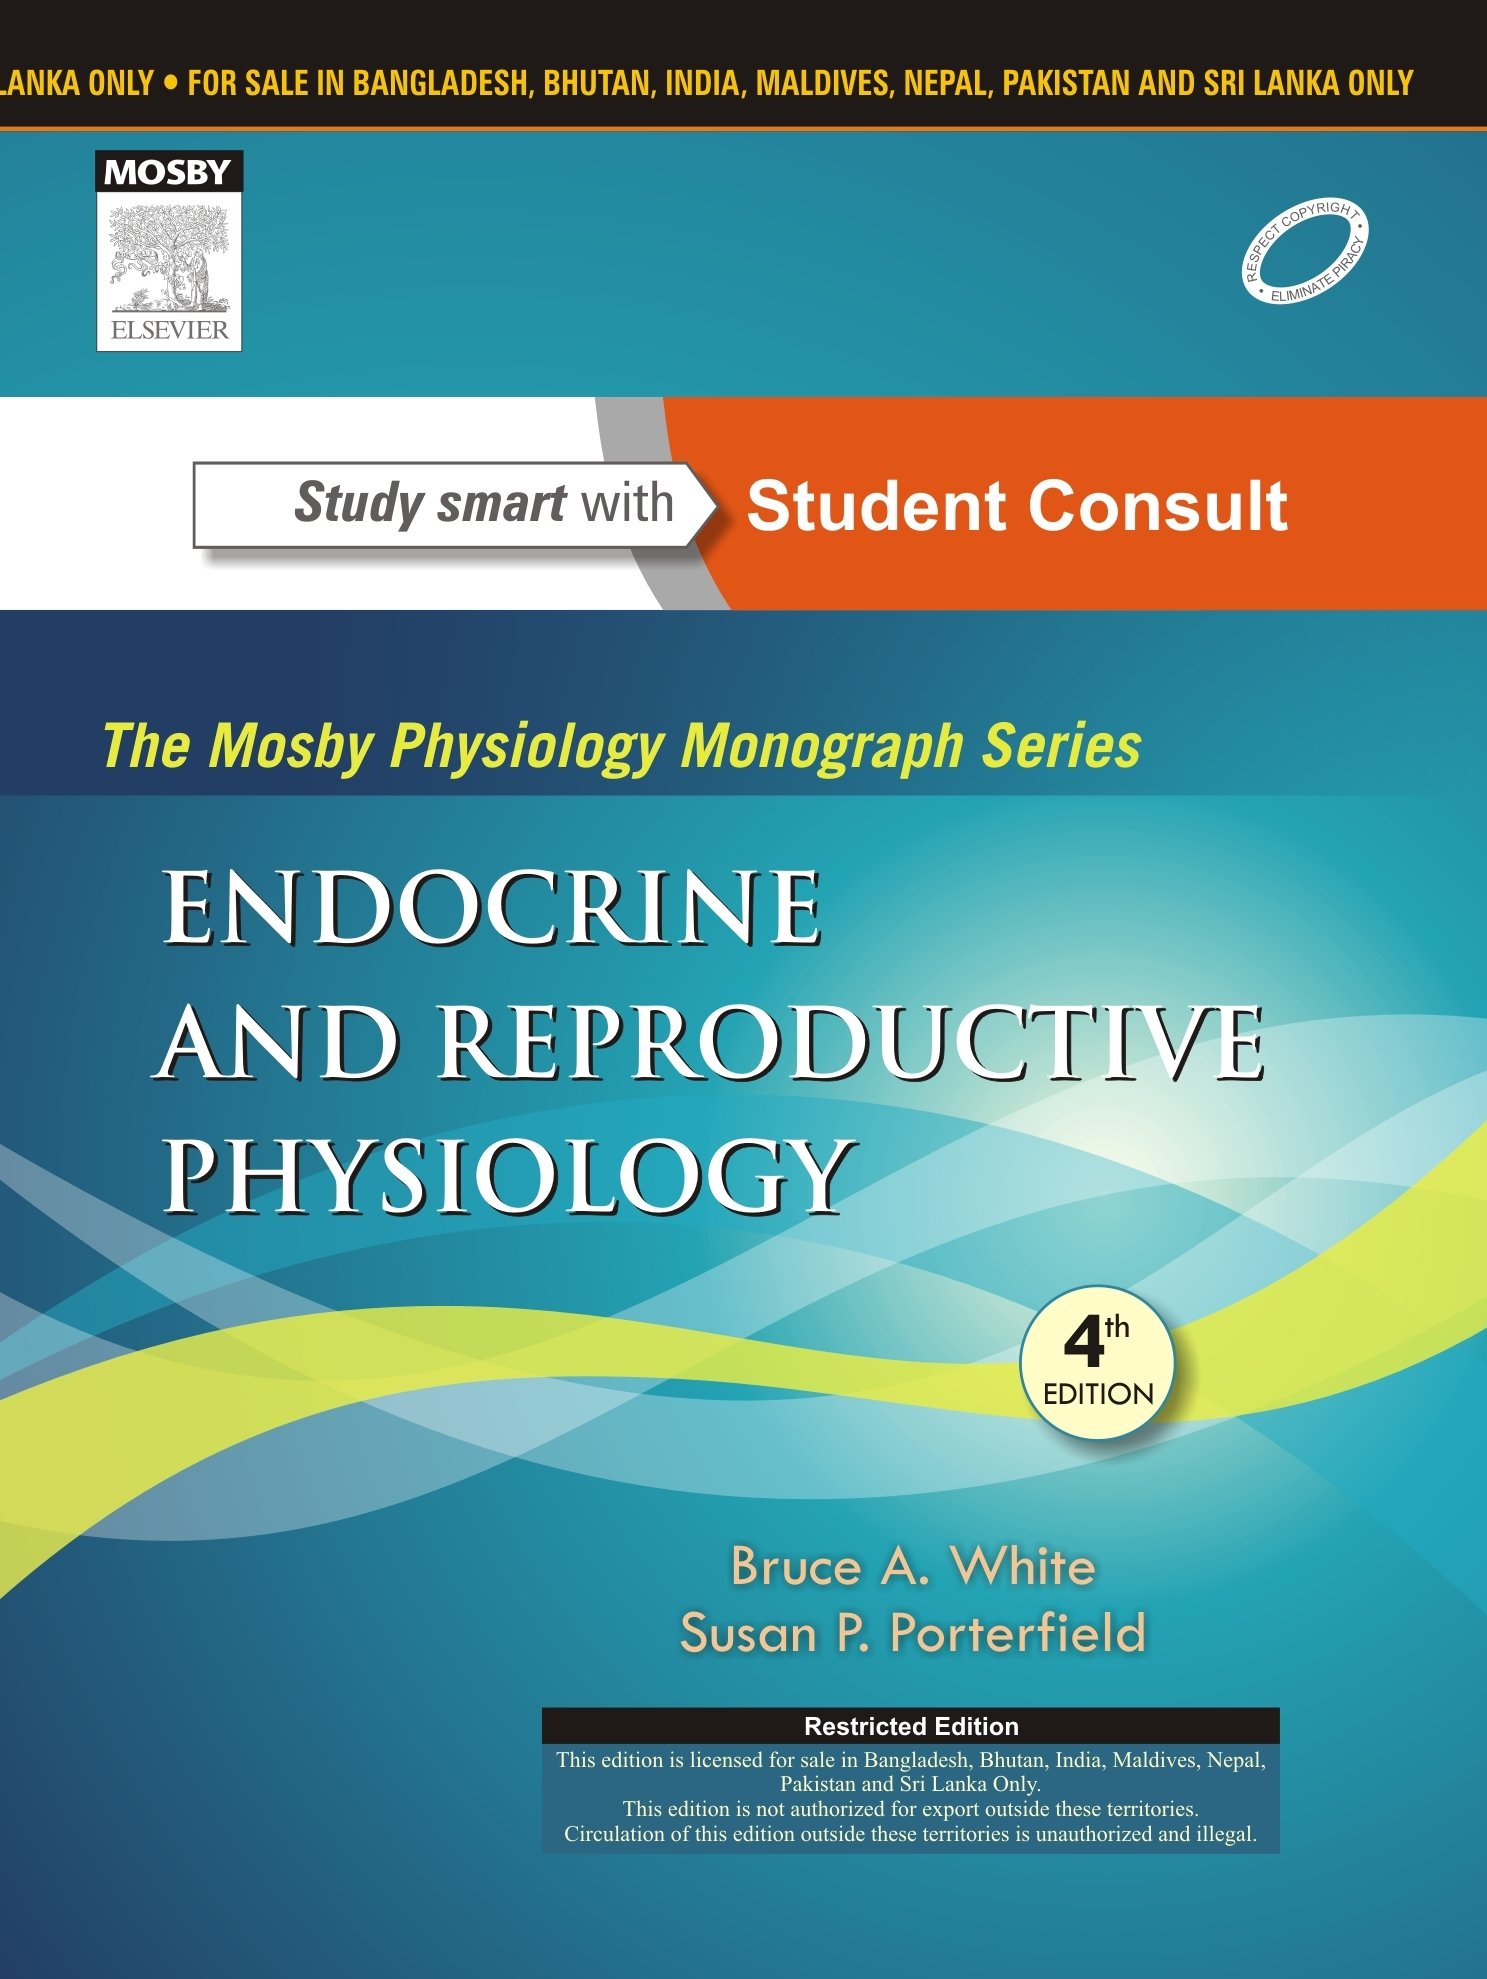 Endocrine And Reproductive Physiology (With Student Consult Online Access), 4E